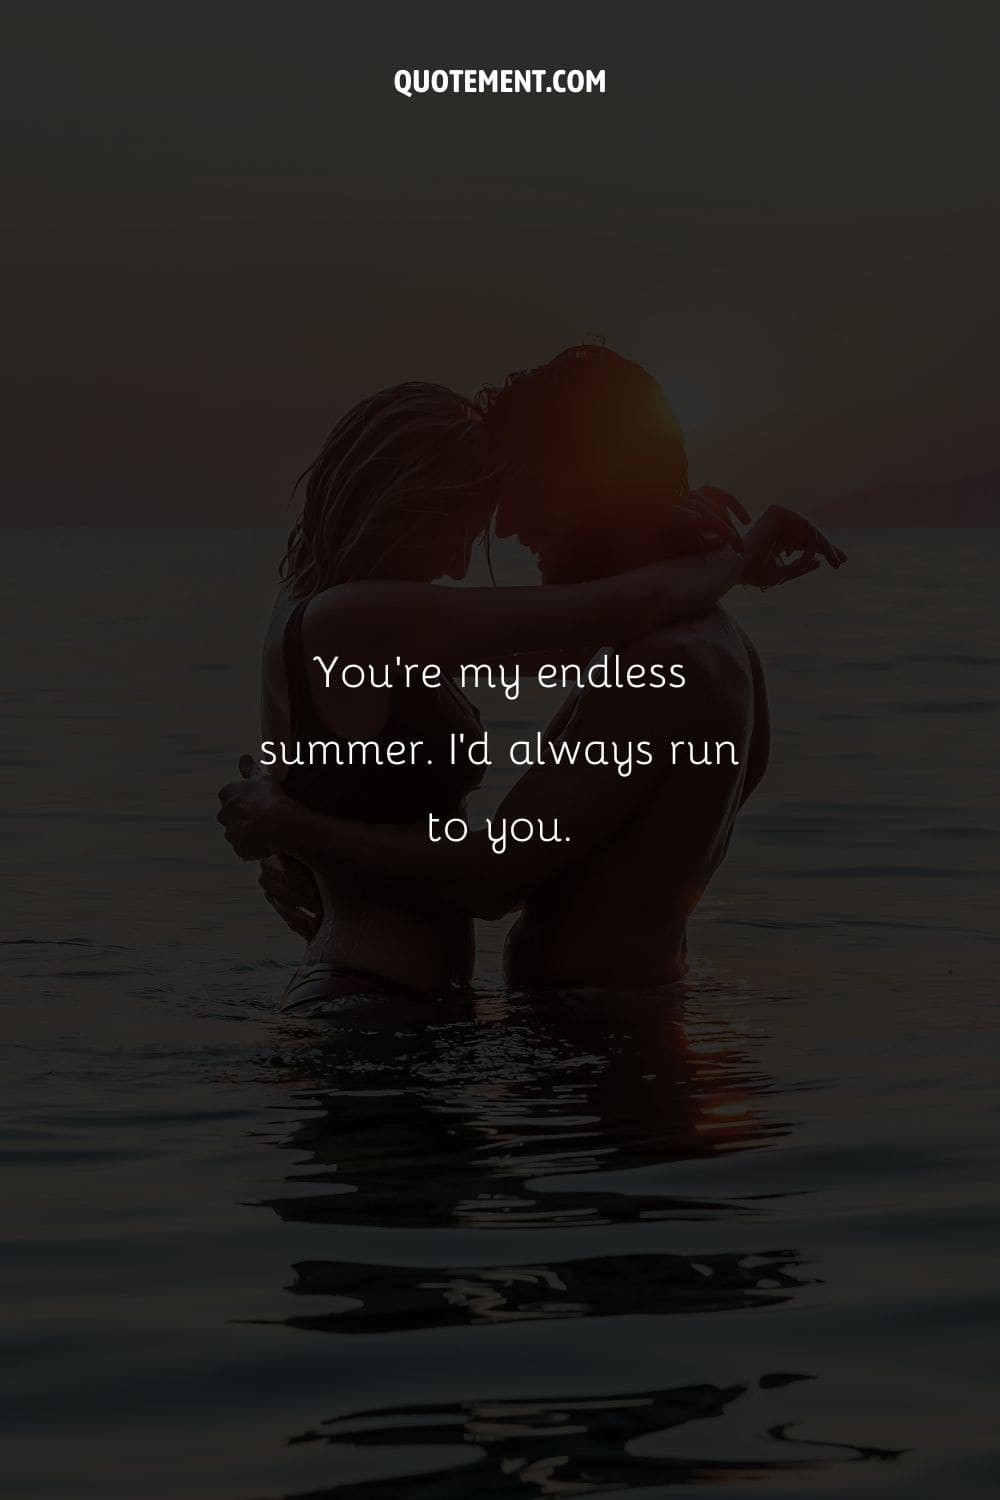 You’re my endless summer. I’d always run to you.